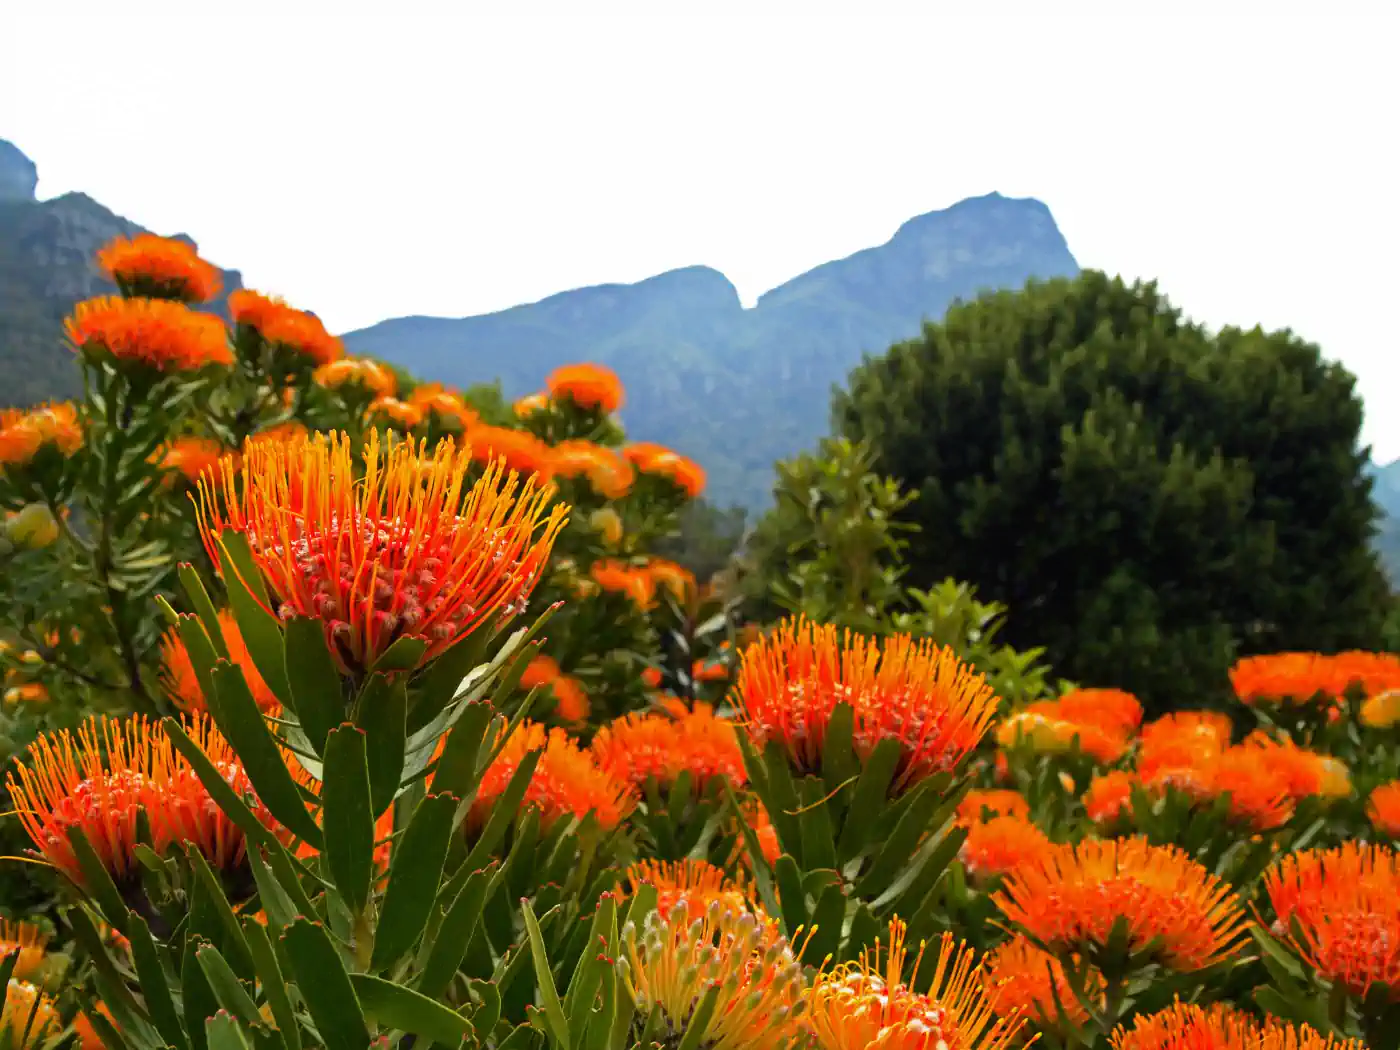 Field of blooming orange Protea flowers with lush green foliage - Fabulous Flowers and Gifts, Proteas Collection